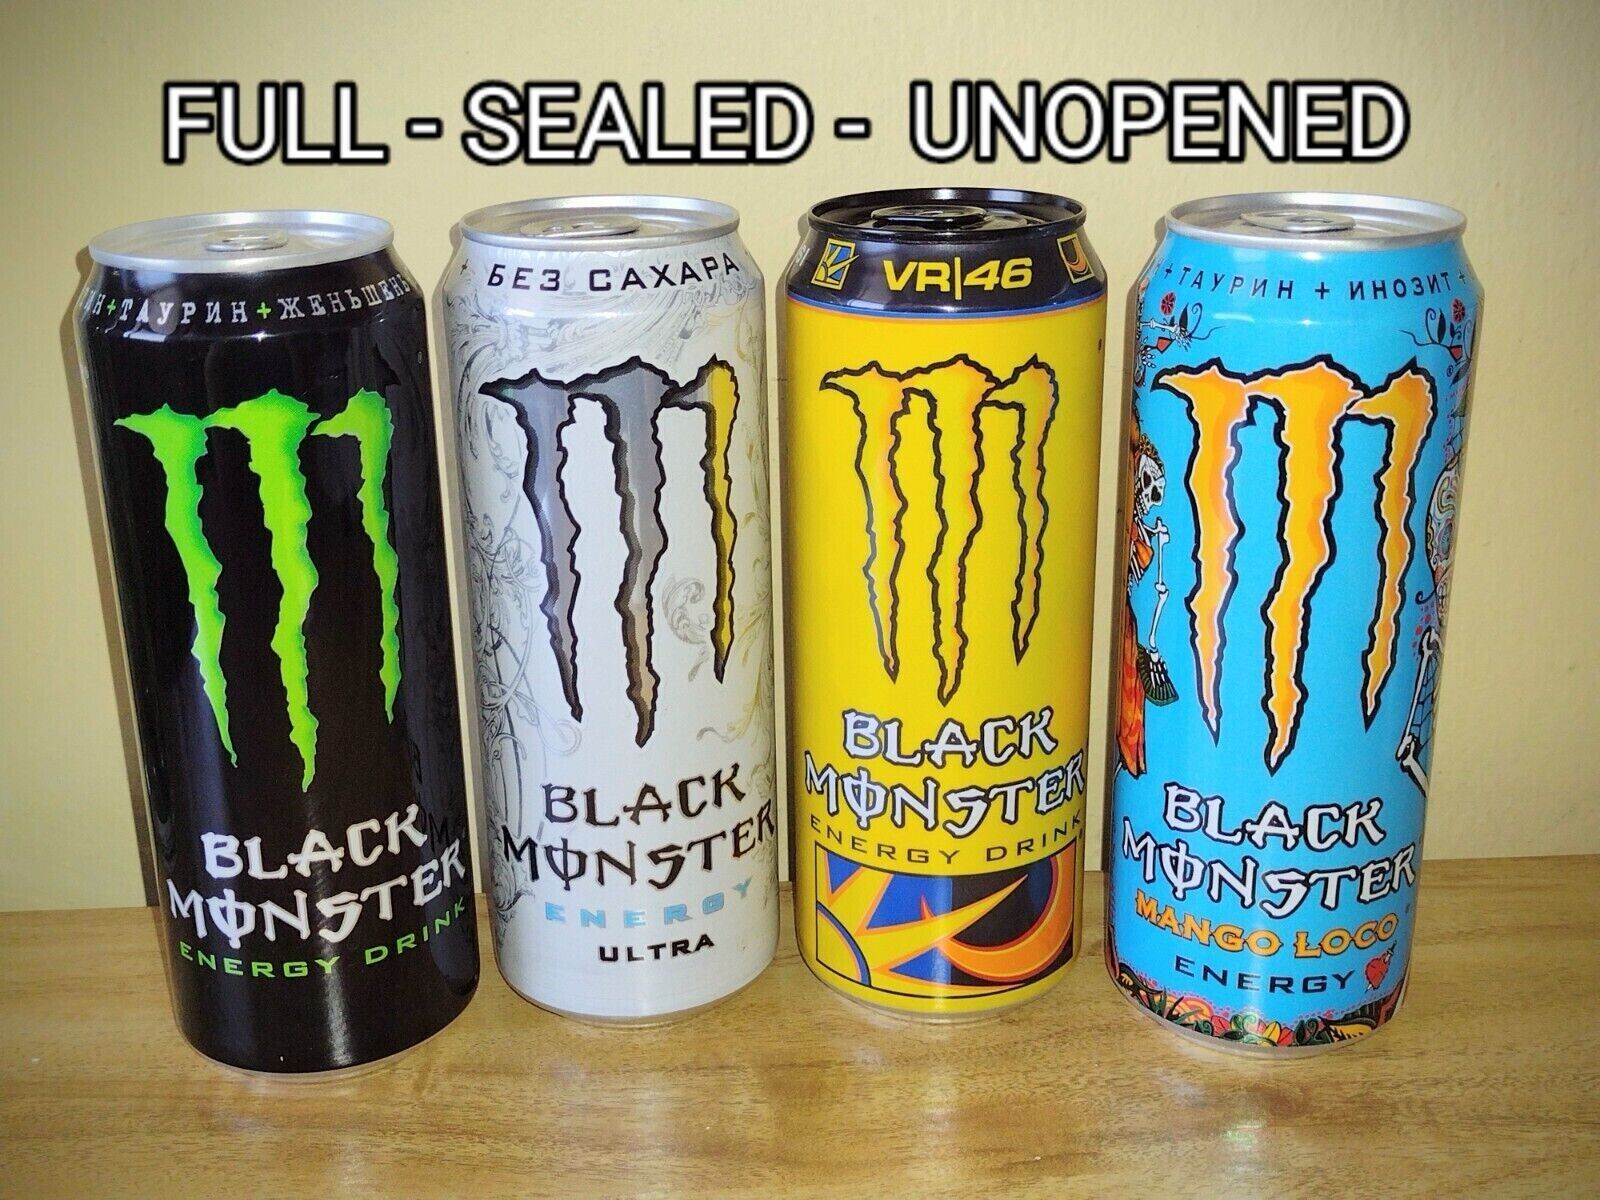 RARE BLACK MONSTER ENERGY DRINK FROM RUSSIA - SET OF FULL 449mL CANS